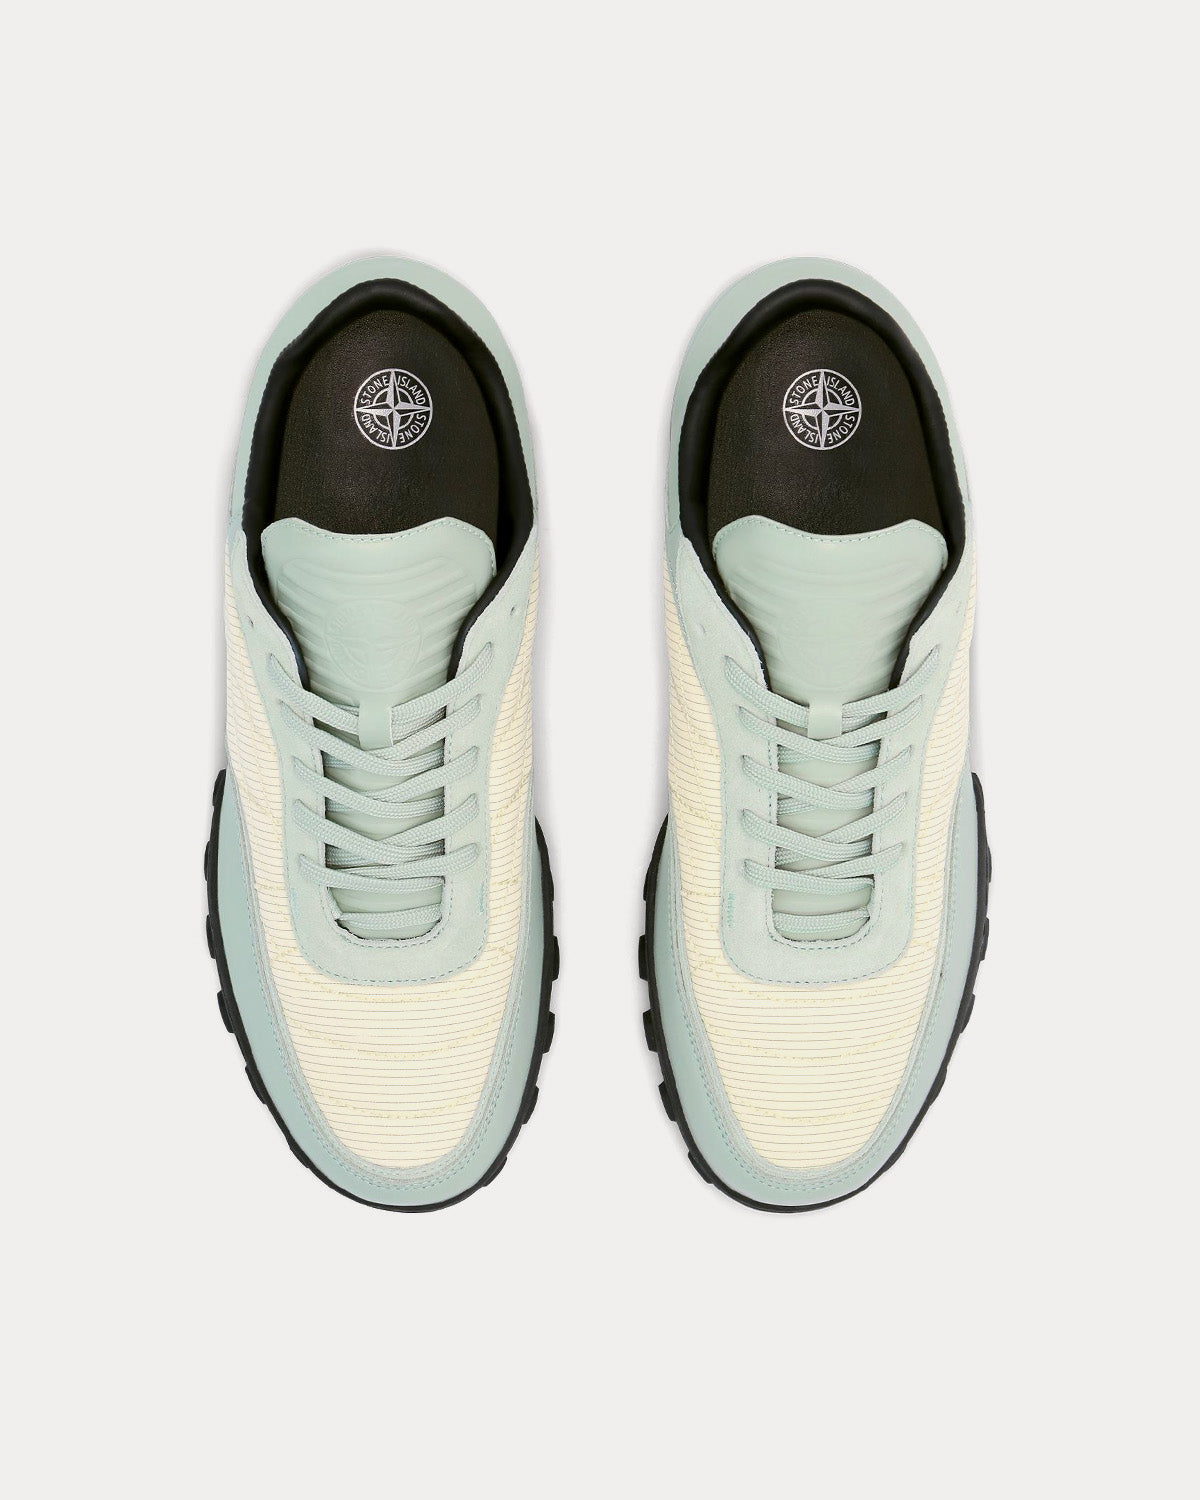 Stone Island - S0202 Light Green Low Top Sneakers